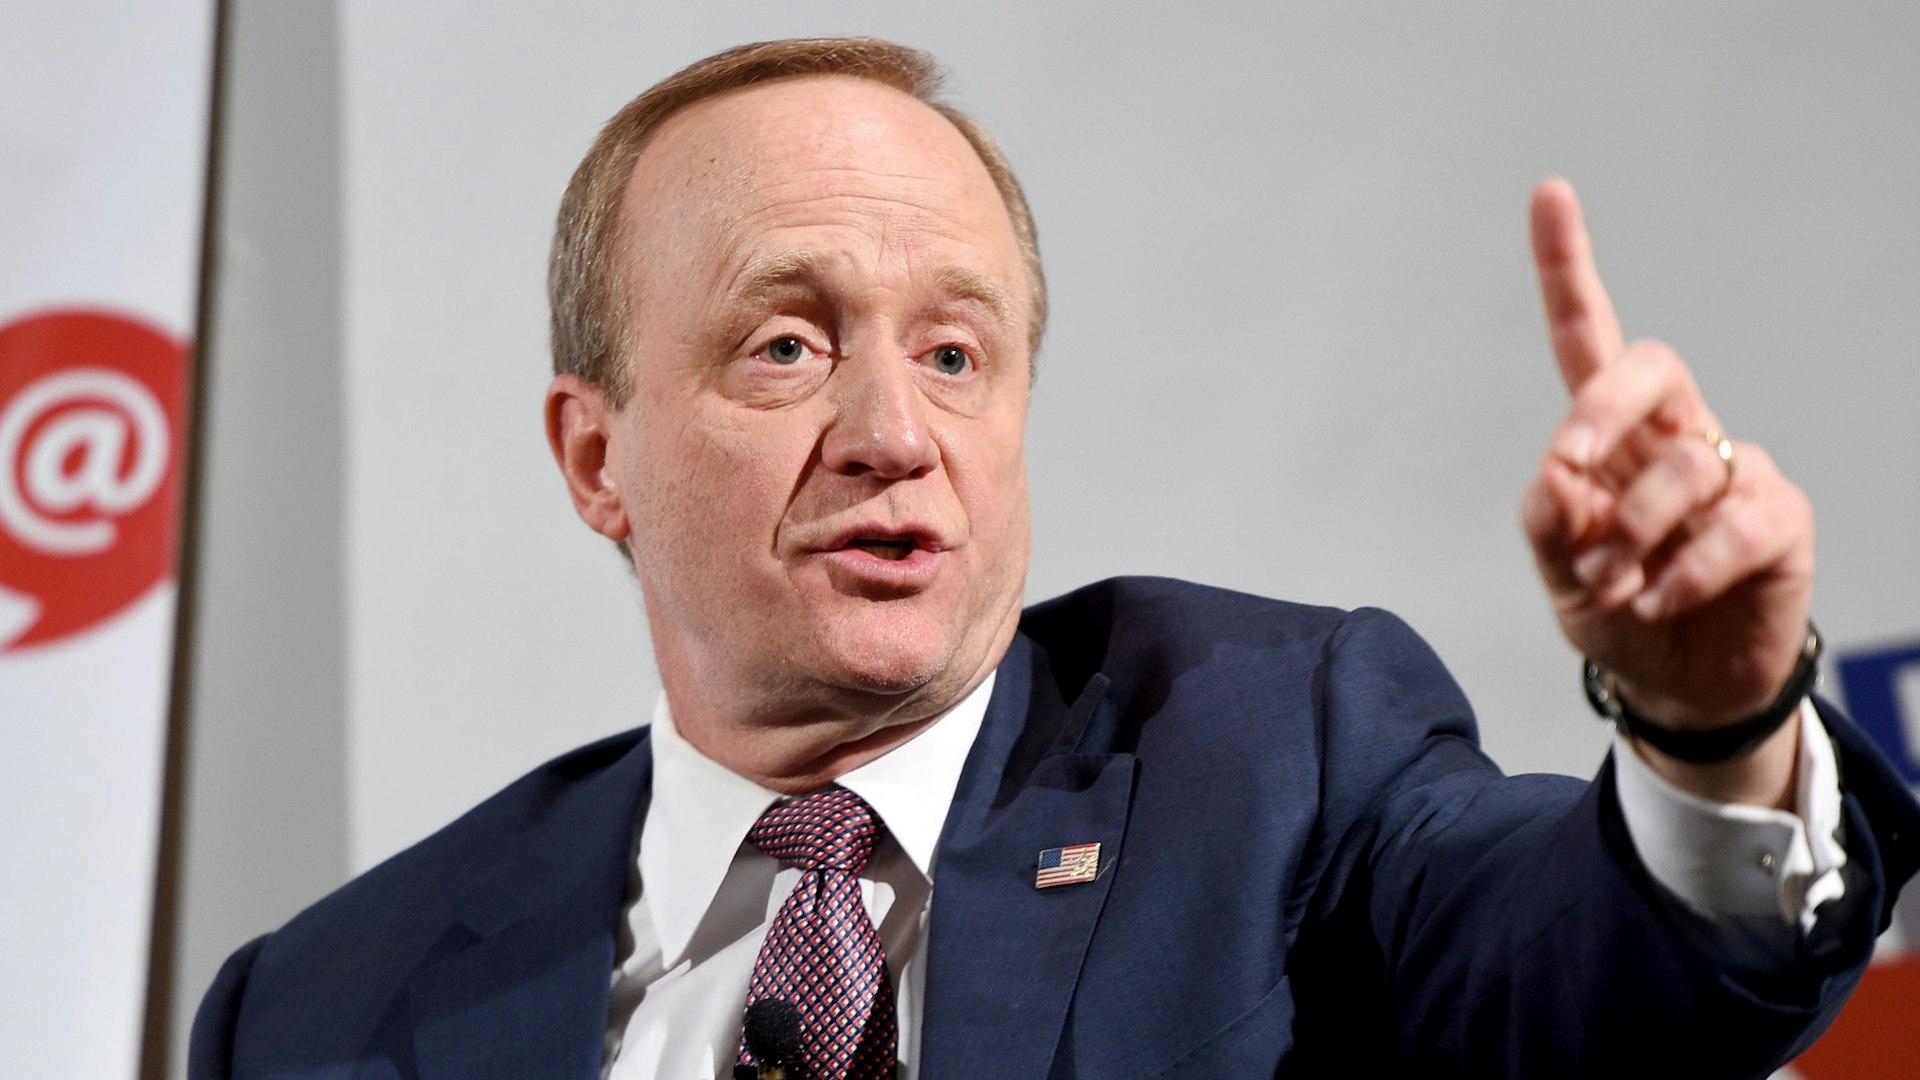 Paul Begala at 'WTF: The Hillary Panel' during Politicon at Pasadena Convention Center on July 29, 2017 in Pasadena, California.